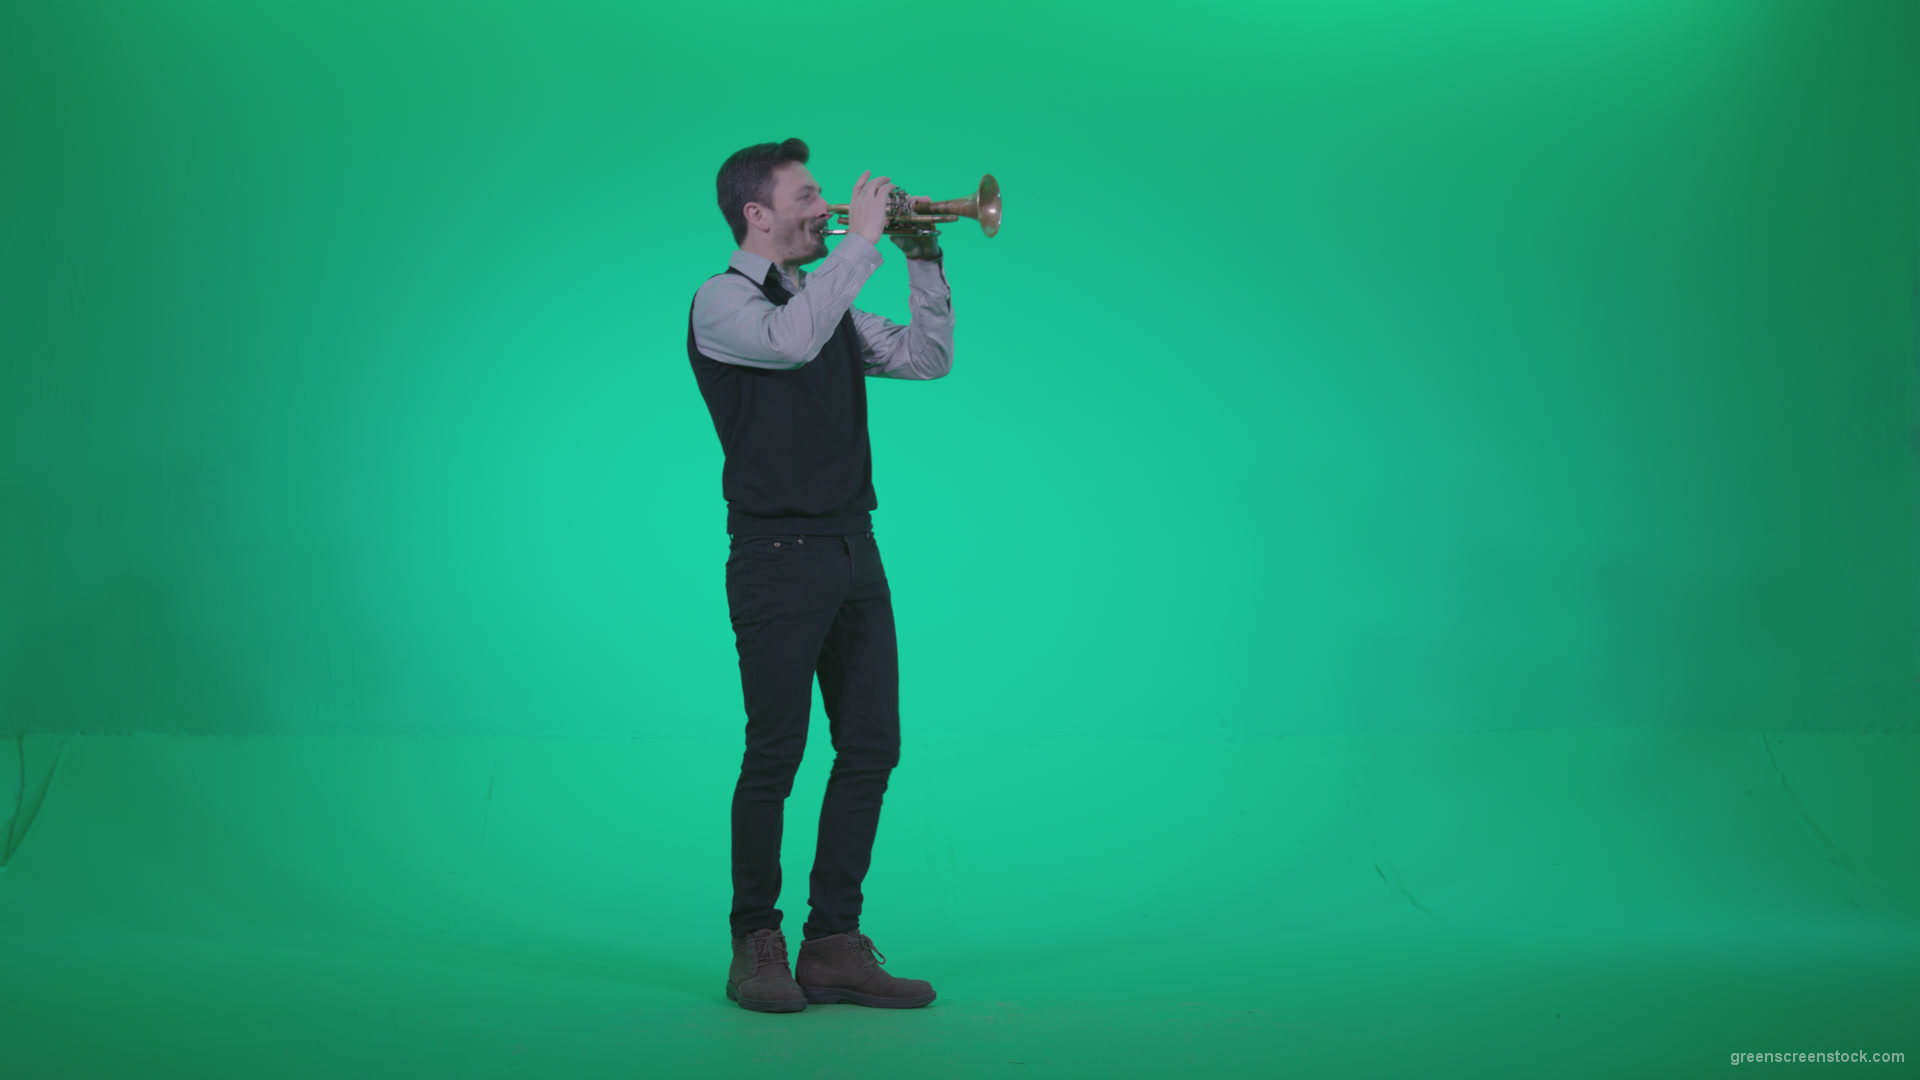 Gold-Trumpet-playing-1_002 Green Screen Stock